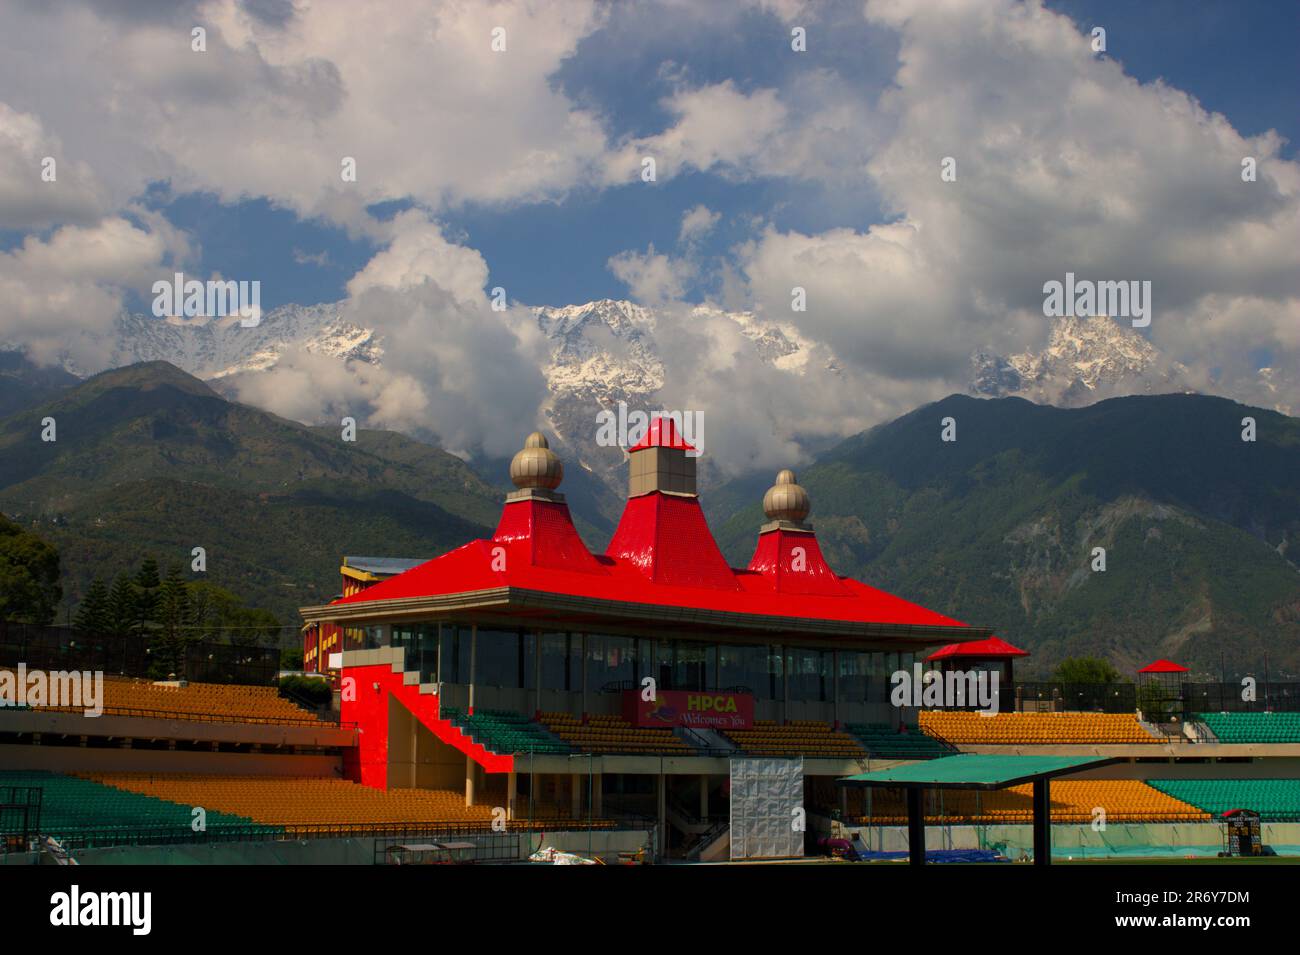 Beautiful and Scenic View of HPCA cricket Stadium and Himalayan Range with heavenly clouds covering them Stock Photo